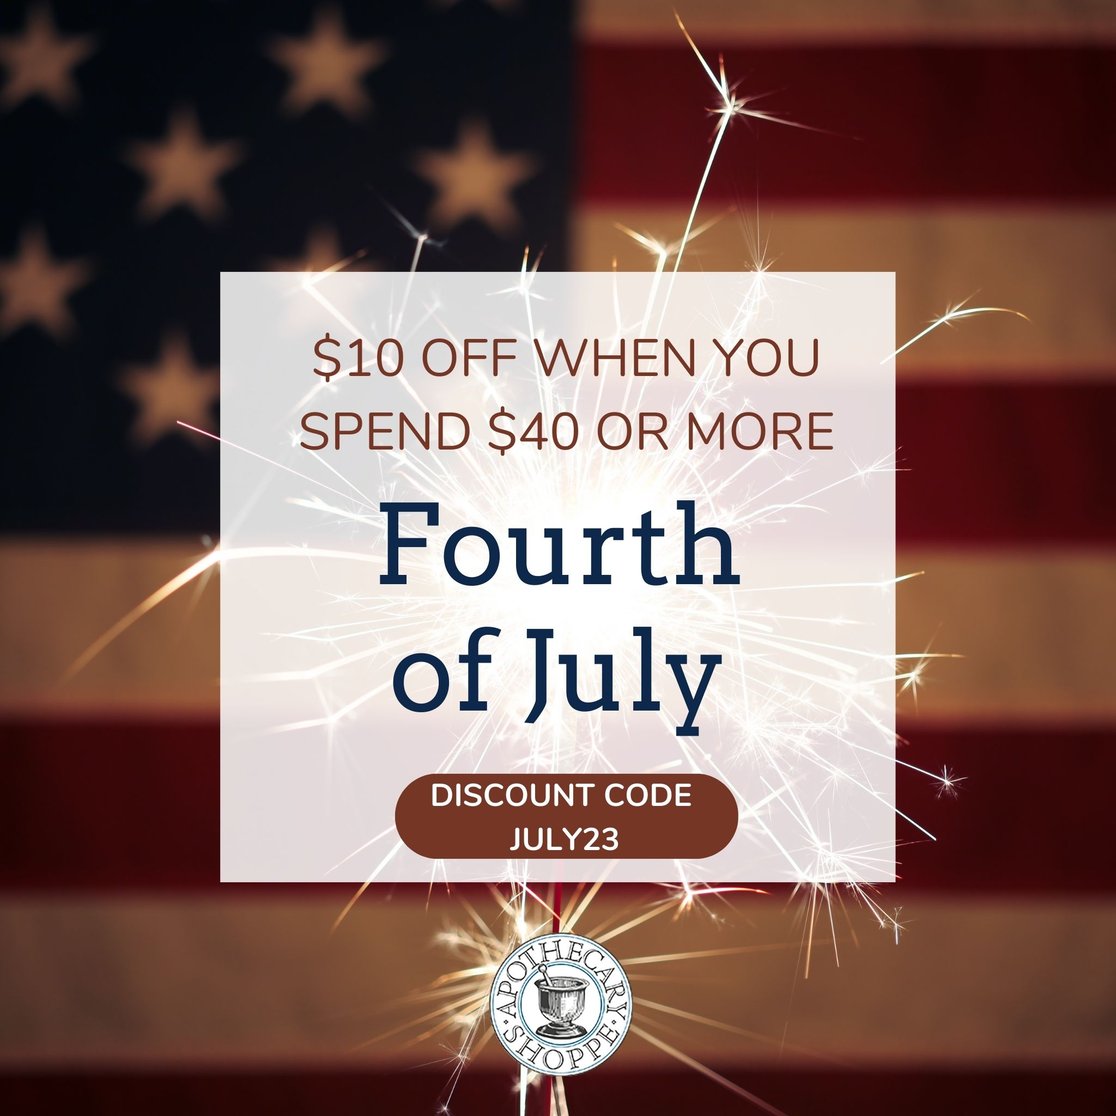 Fourth of July Weekend Sale